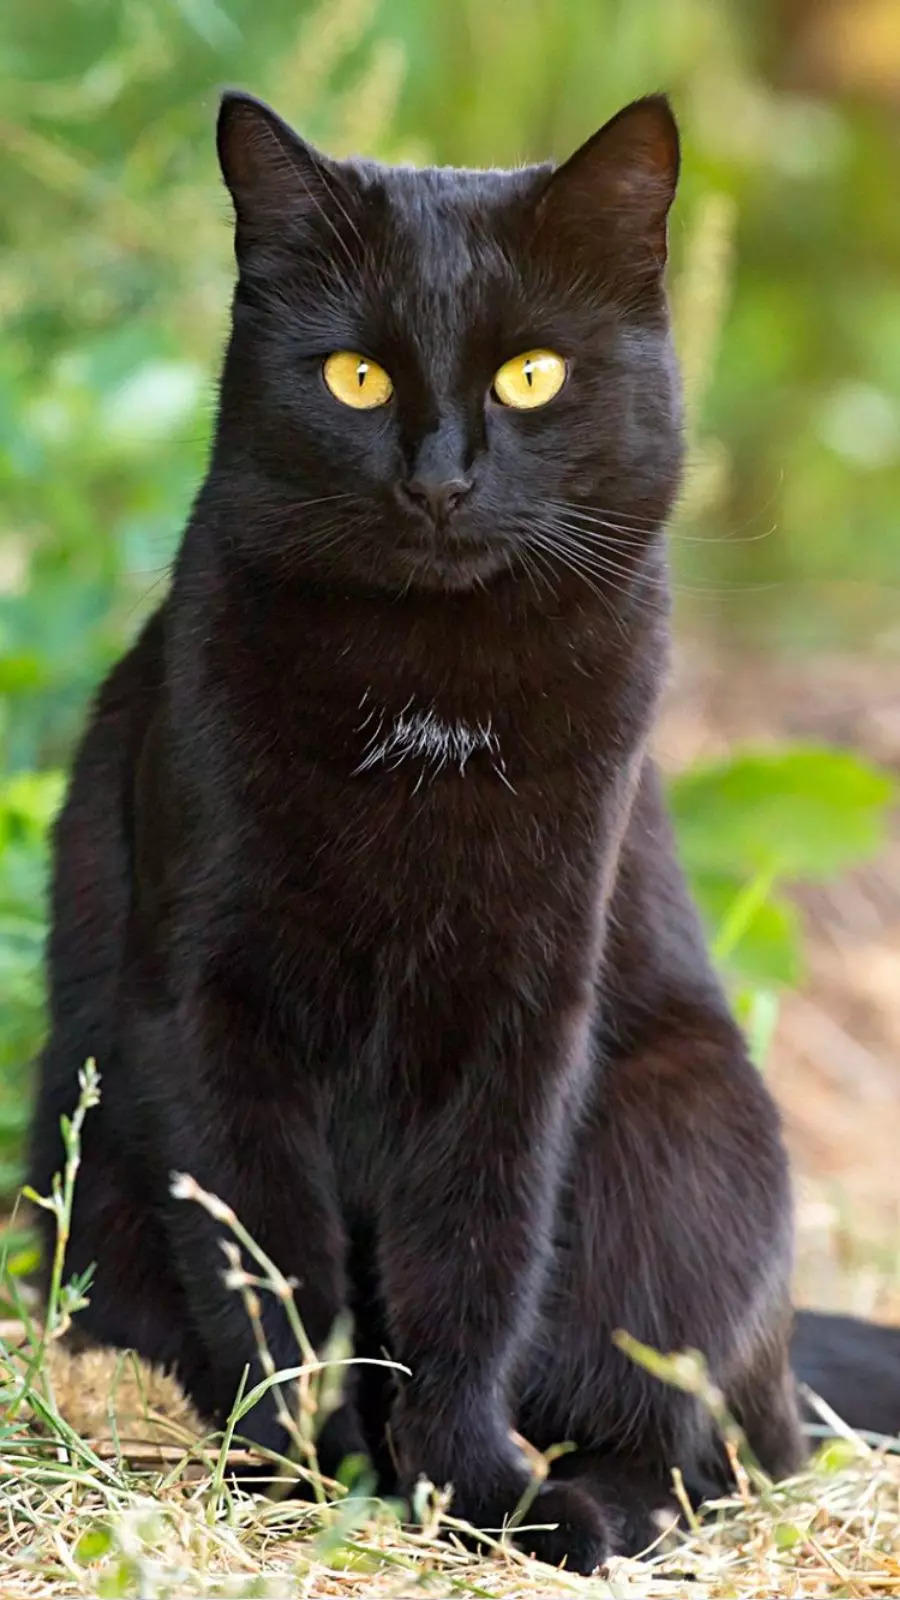 black cat breeds: 7 Black Cat Breeds You Should Know About